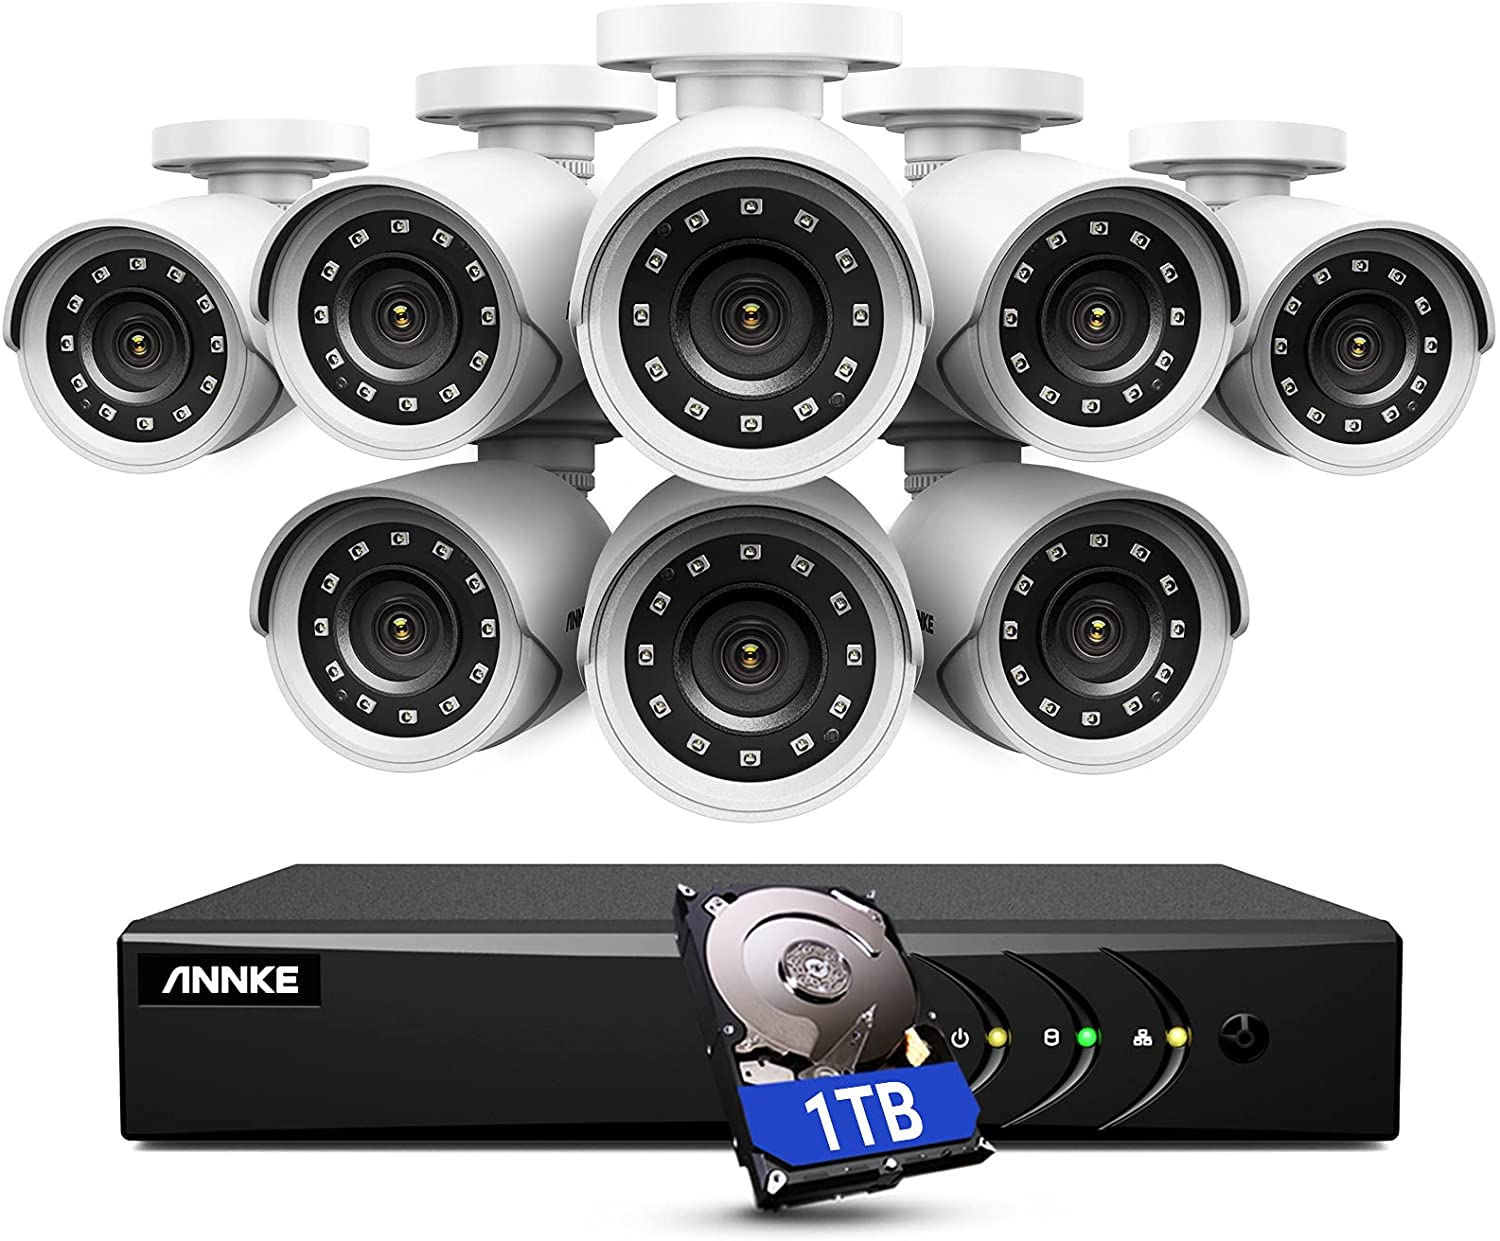 The ANNKE 5MP Lite Wired Security Camera System, featuring eight cameras and a DVR. (Image via Amazon)